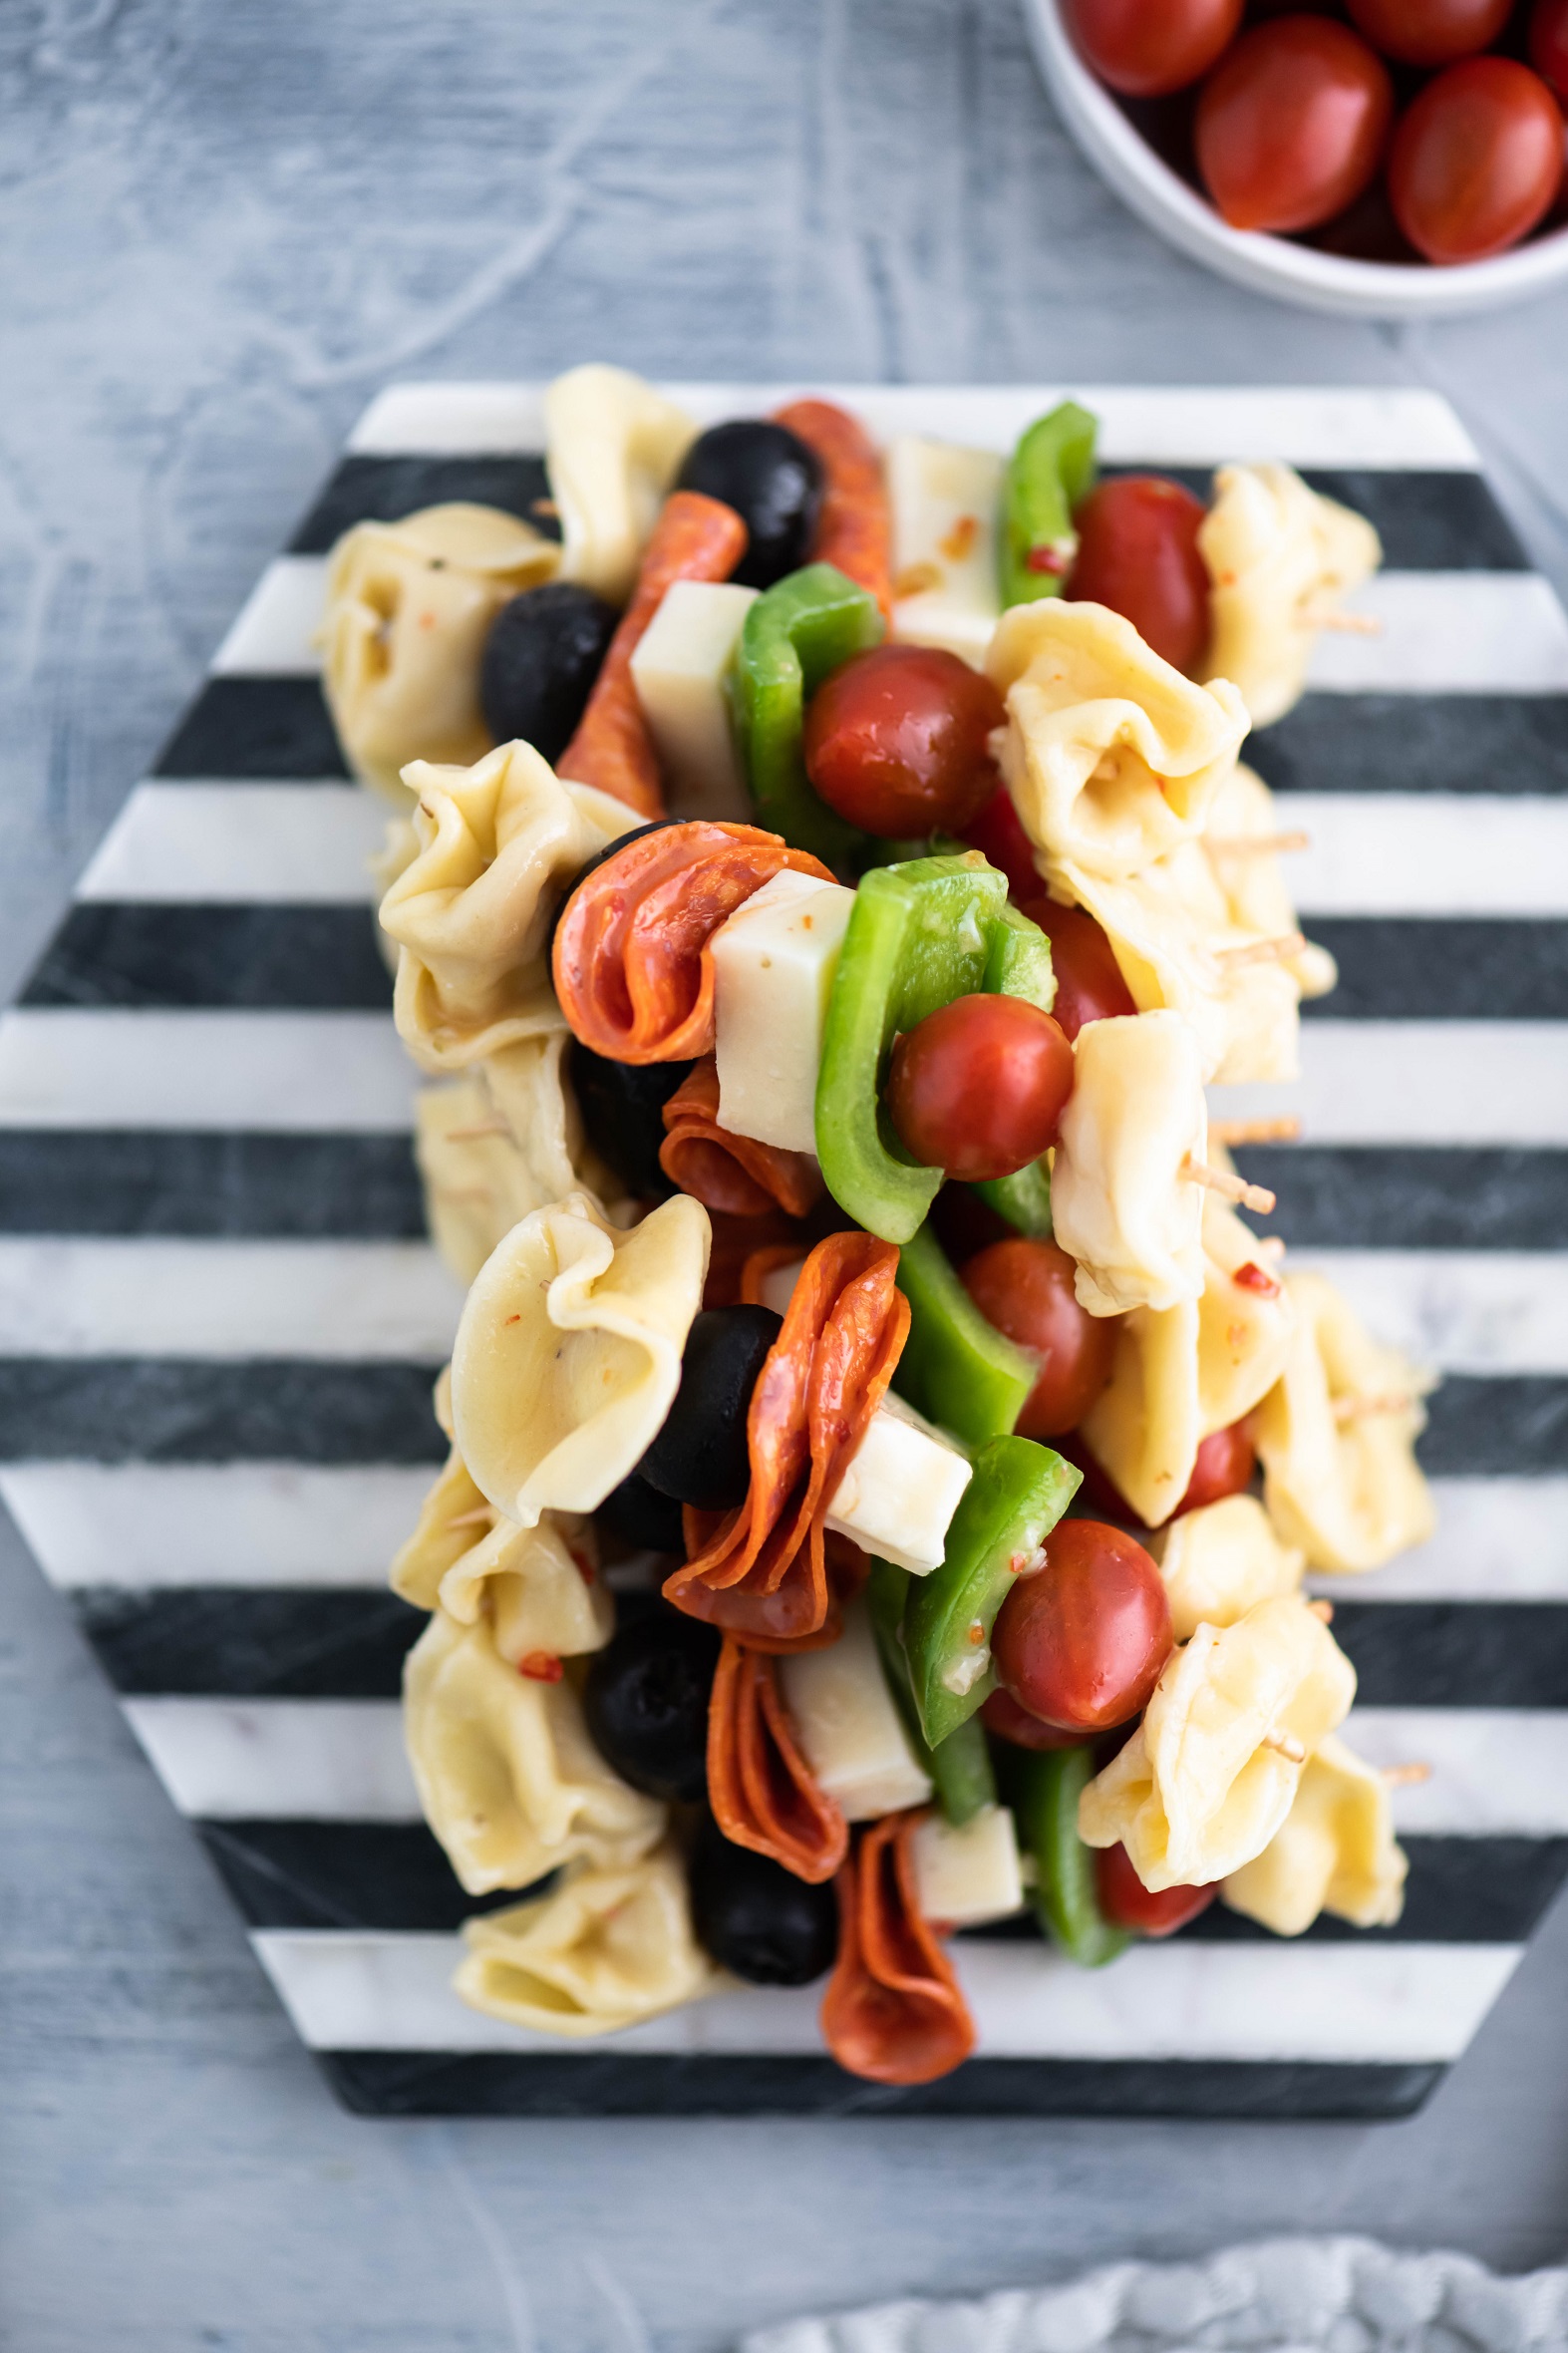 Looking for a fun appetizer or creative lunch box addition? Pasta Salad on a Stick takes all the classic pasta salad ingredients and threads them on a long toothpick for a delicious new spin. Perfect for parties and afternoon snacks alike.